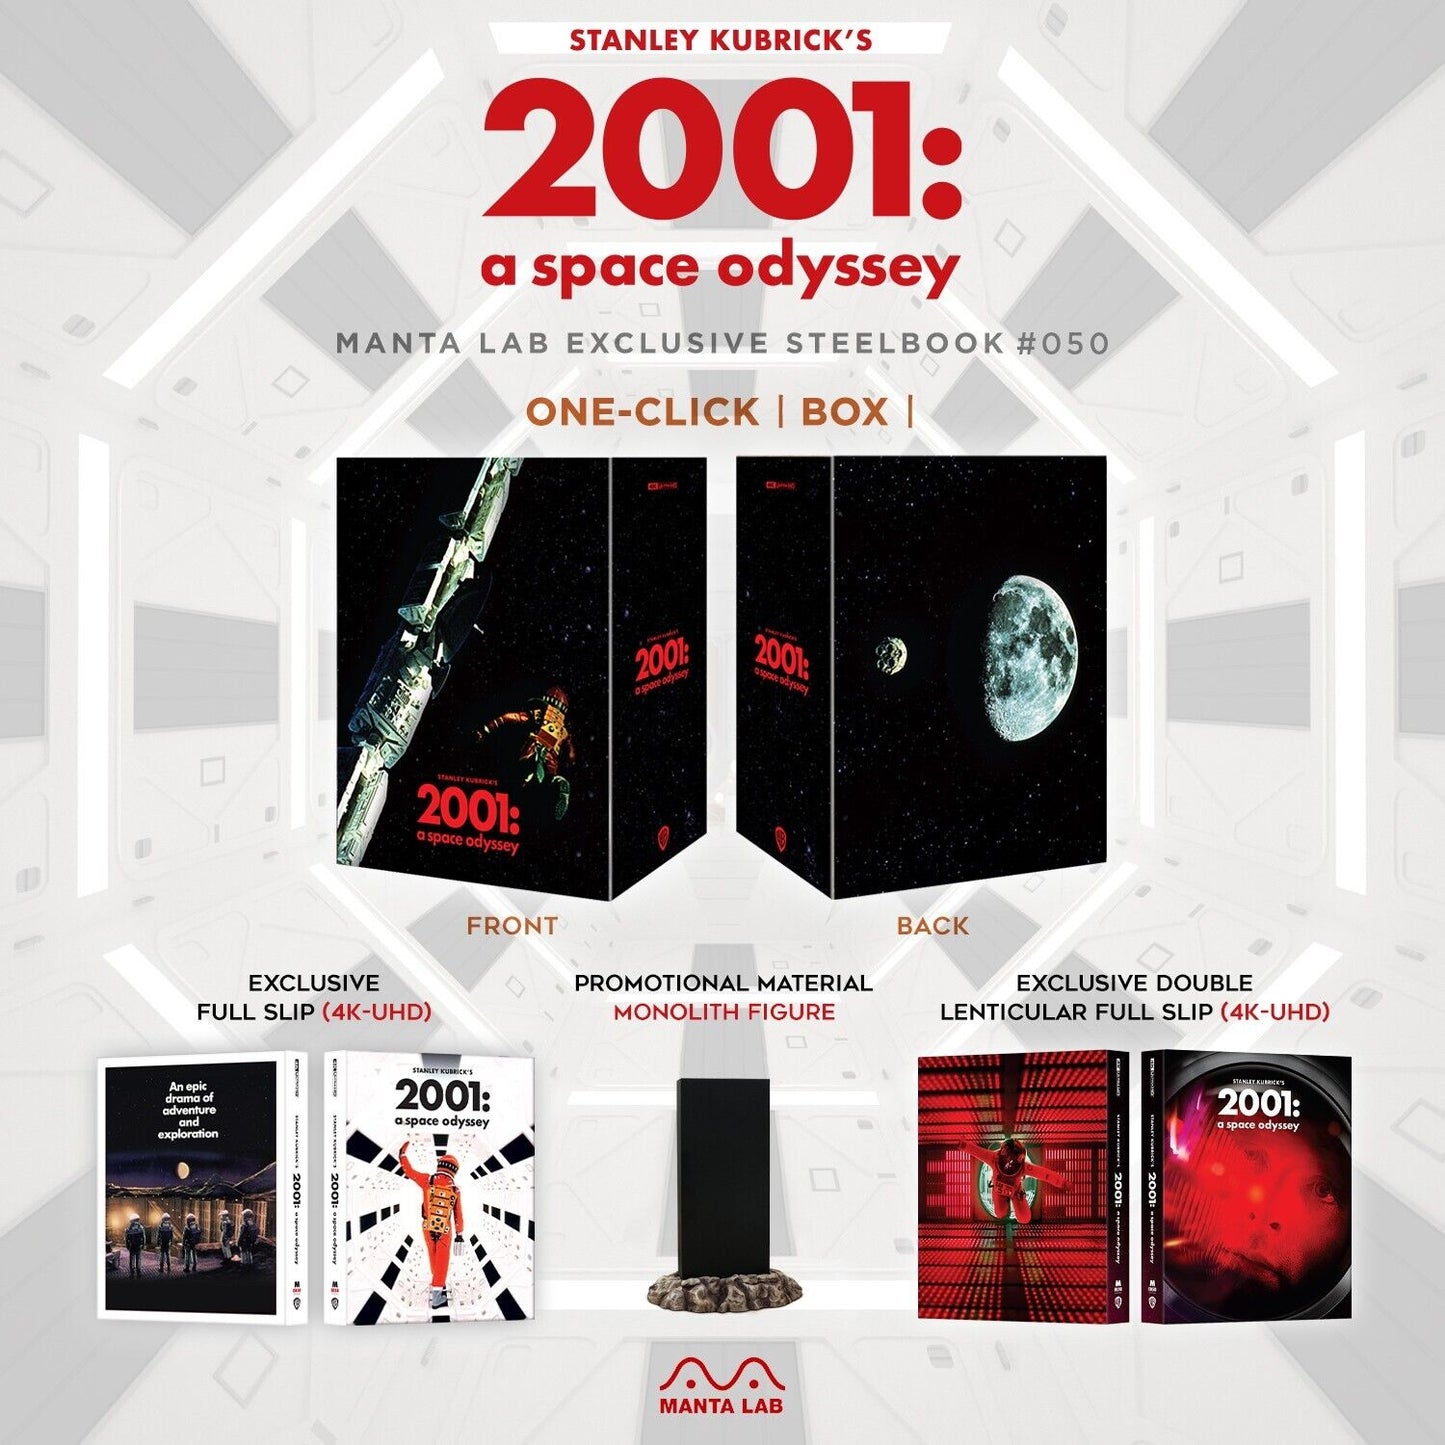 2001: A SPACE ODYSSEY 4K Steelbook Manta Lab Exclusive ME#50 One Click Box Set